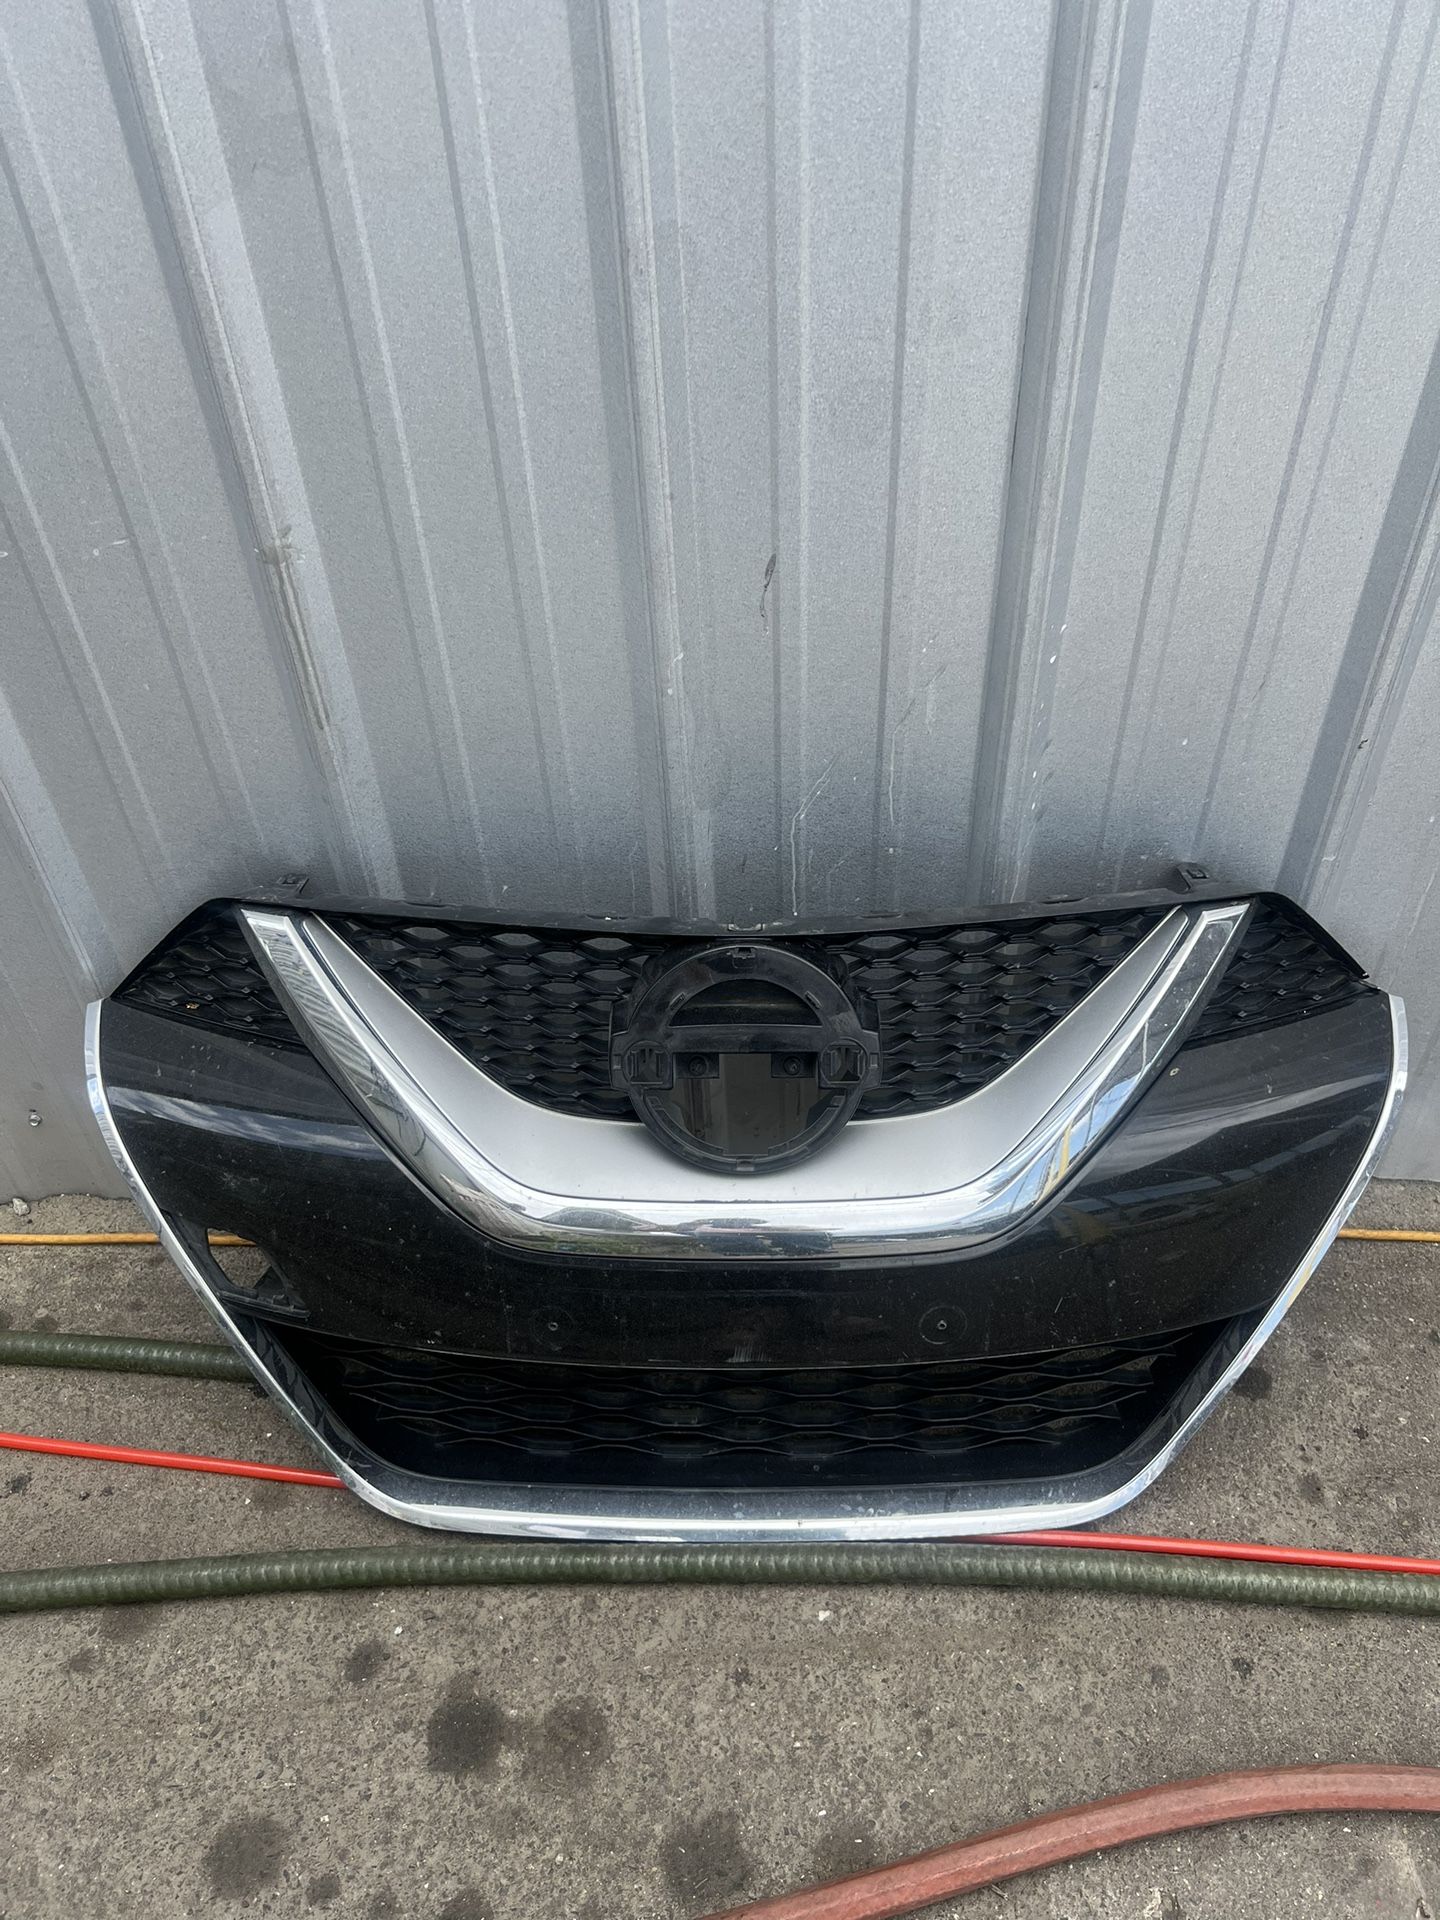 2016-2019 Nissan Maxima Grille